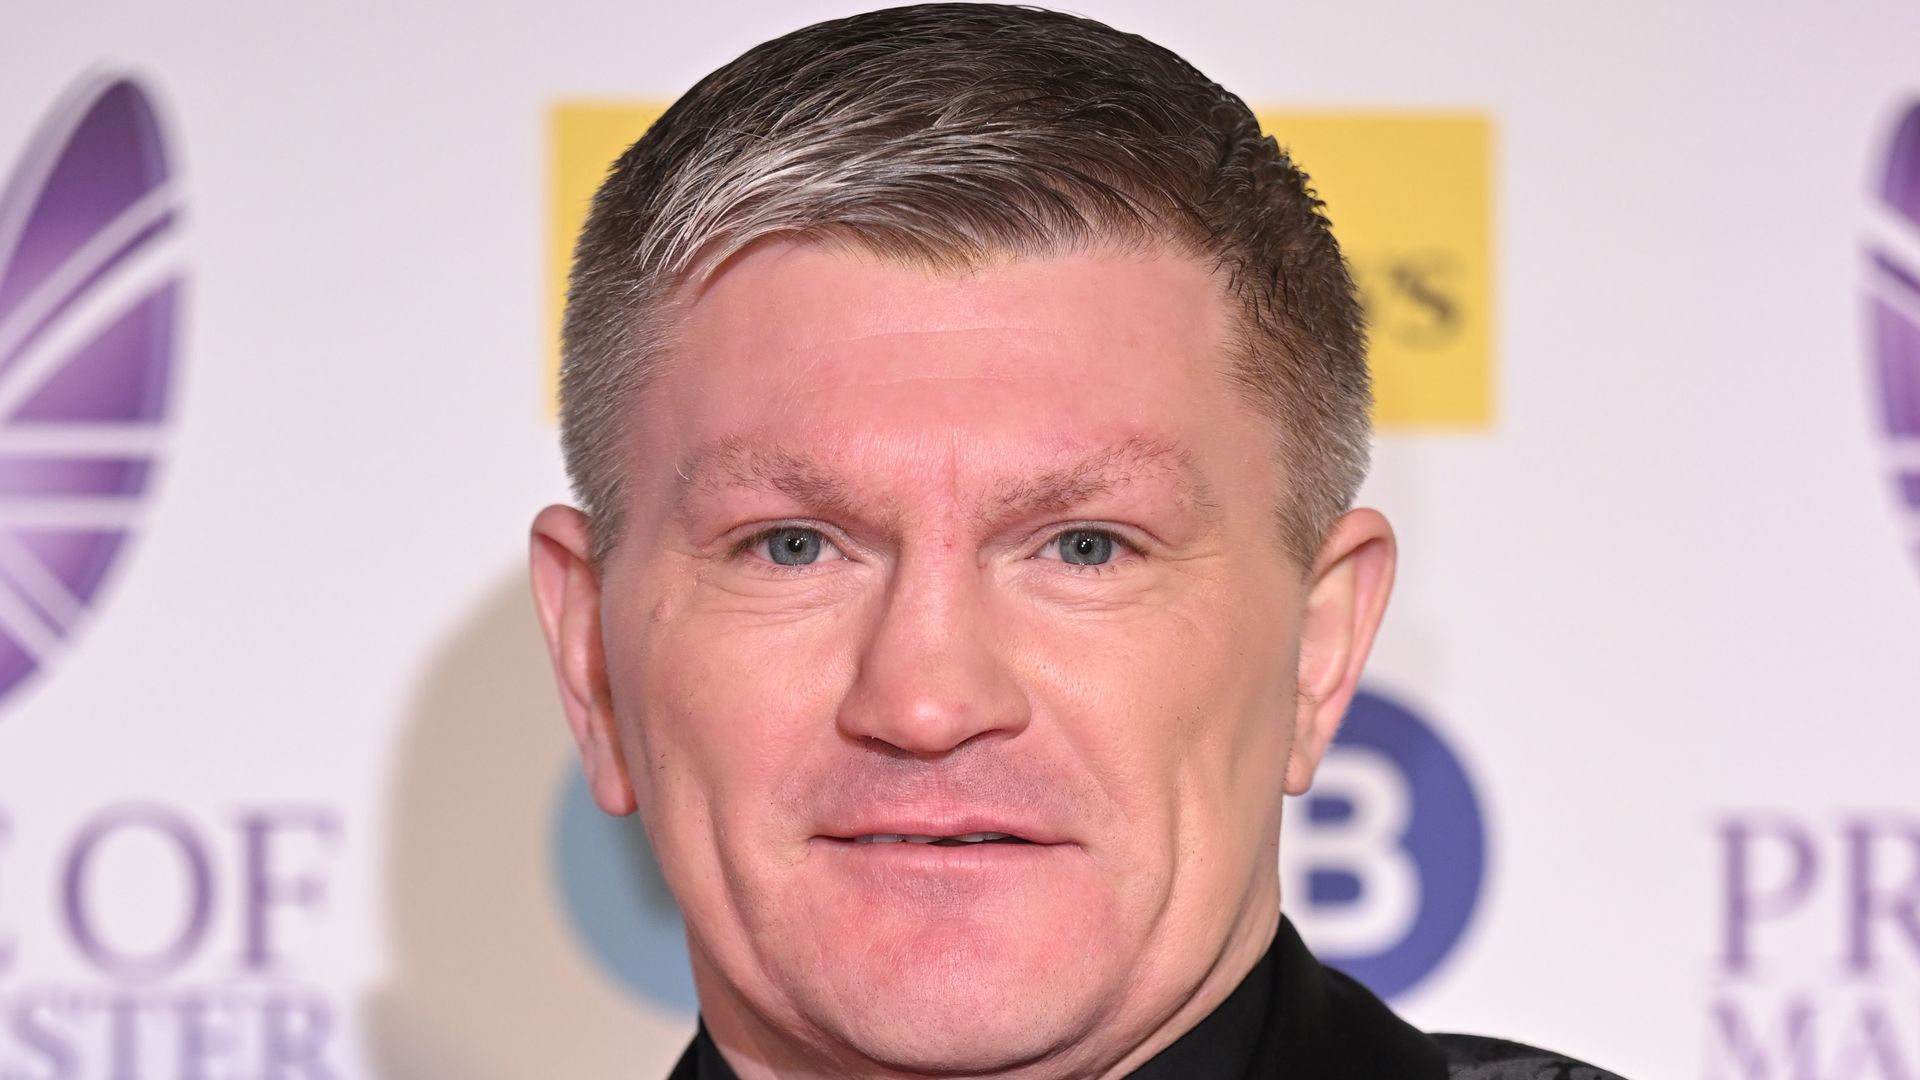 Inside Dancing on Ice star Ricky Hatton's dating history